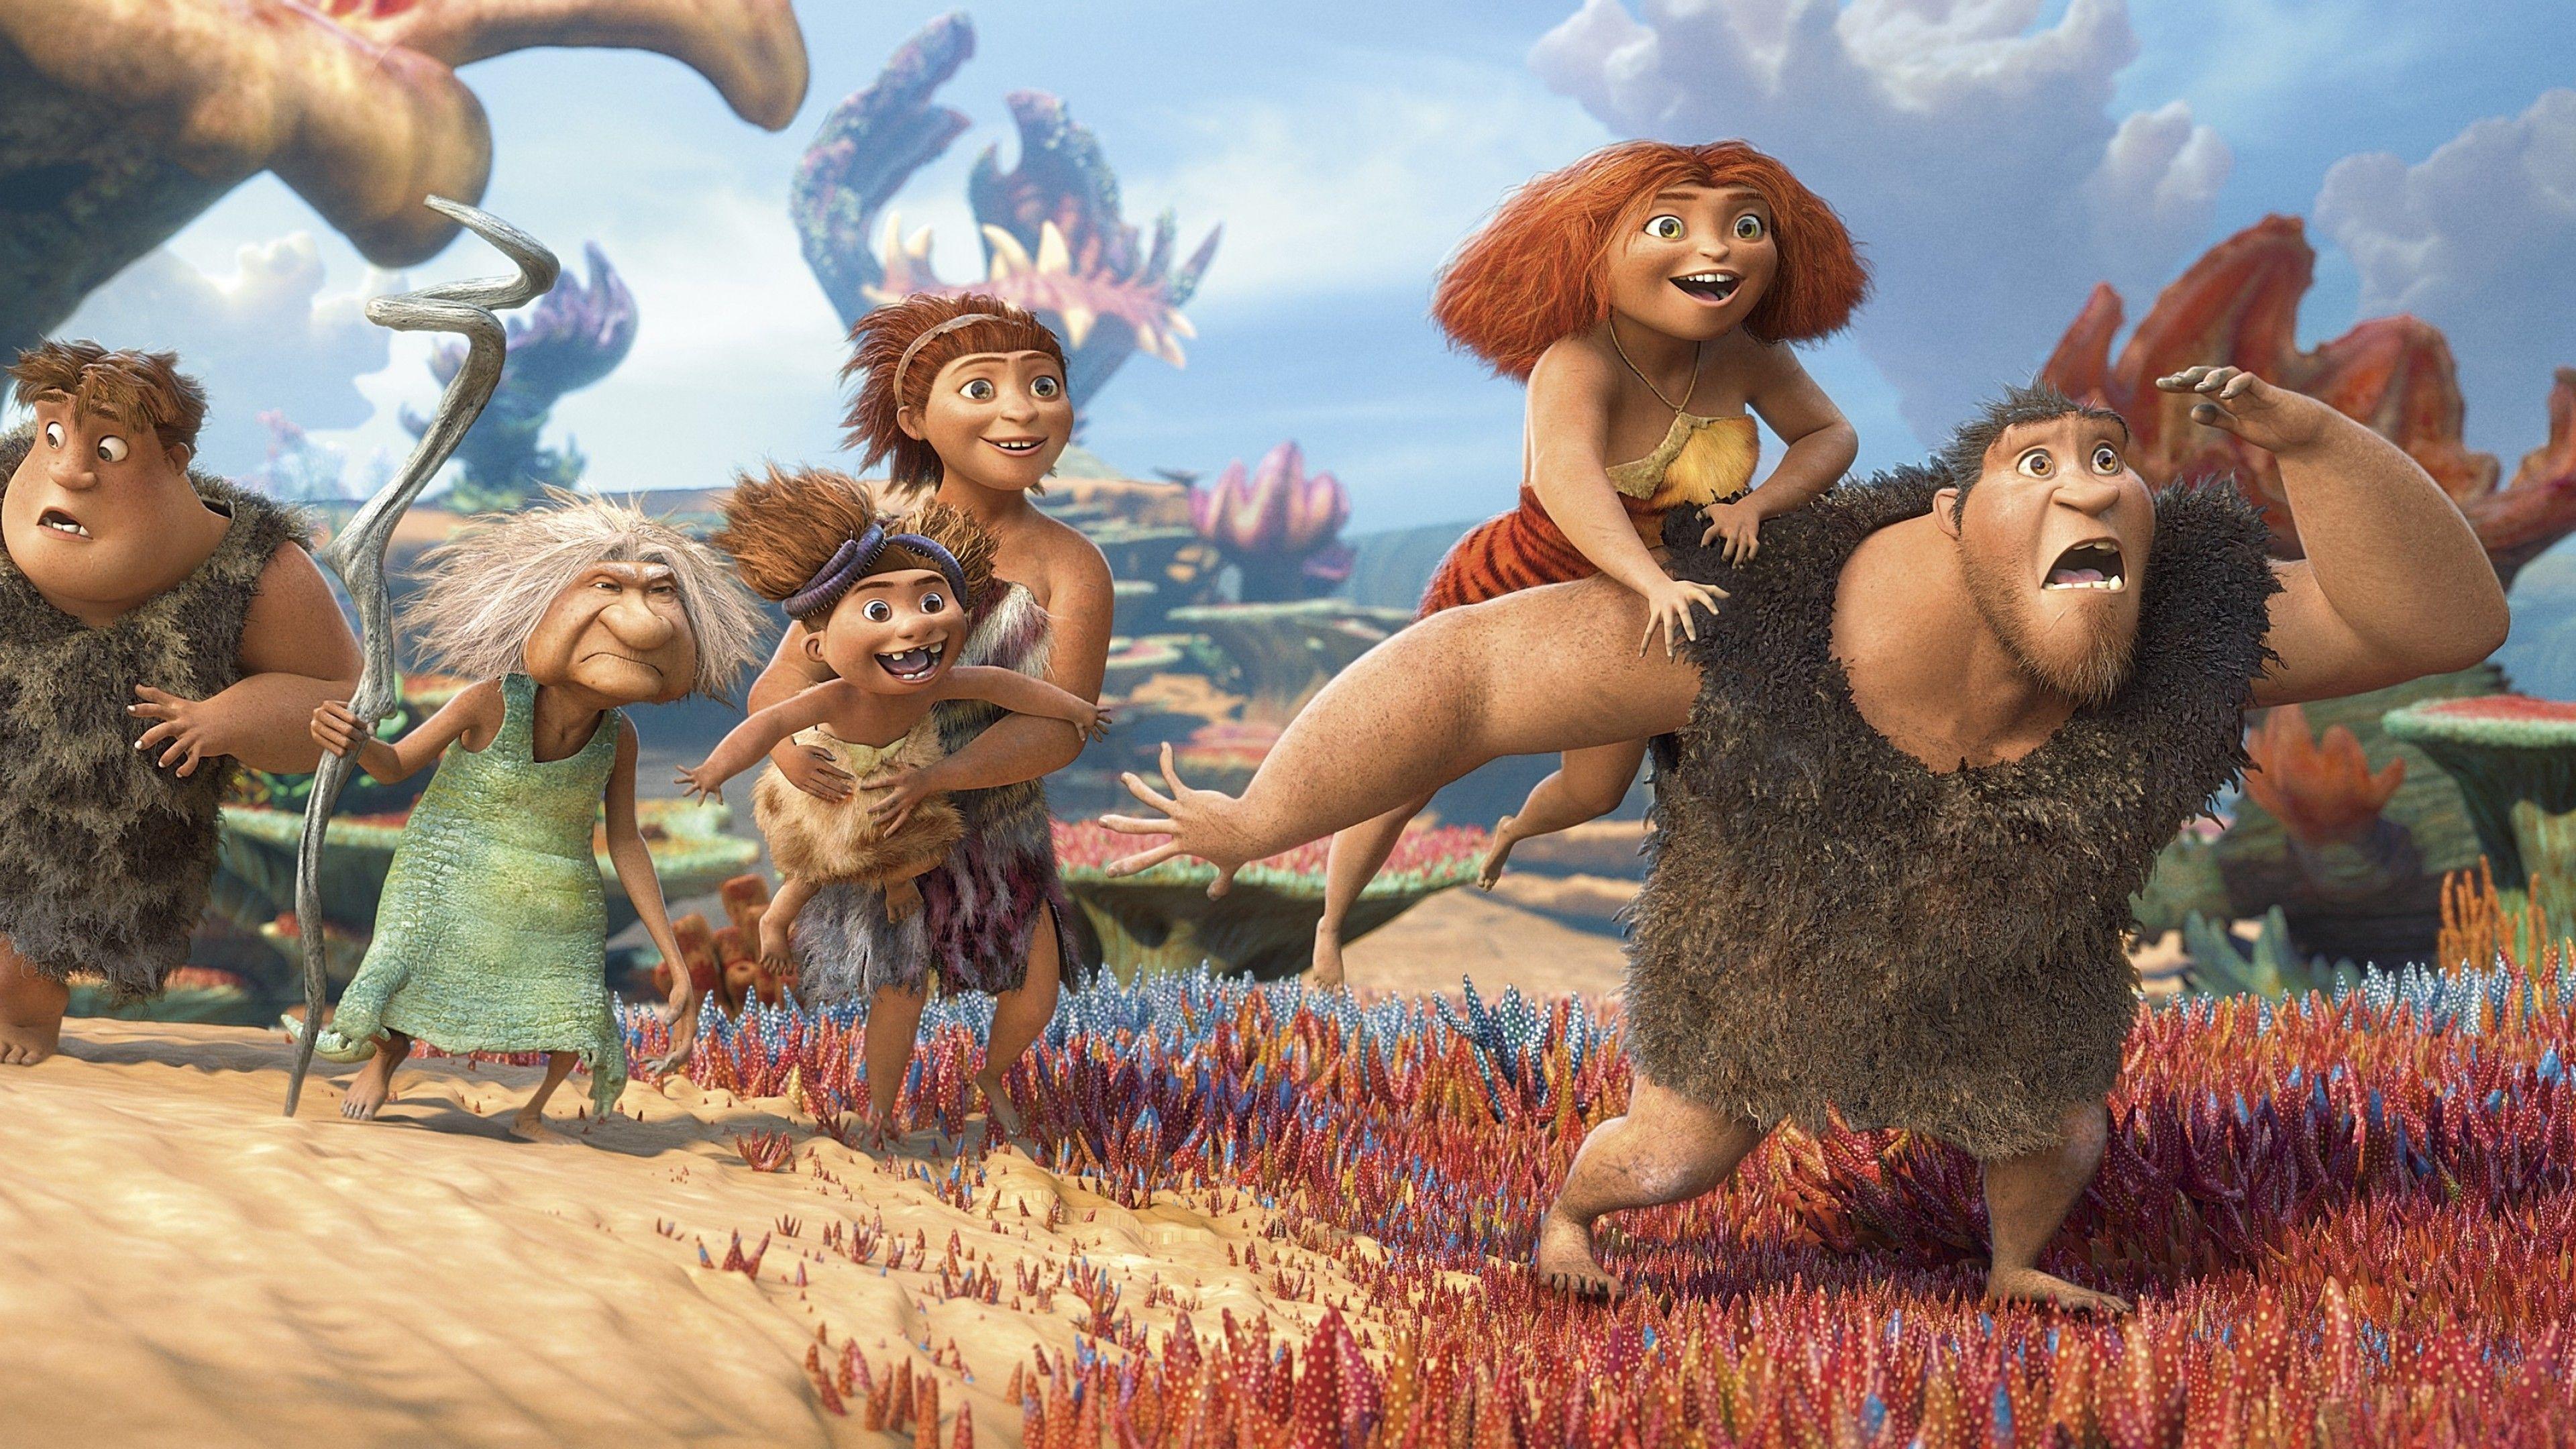 The Croods 2 Wallpapers - Top Free The Croods 2 Backgrounds